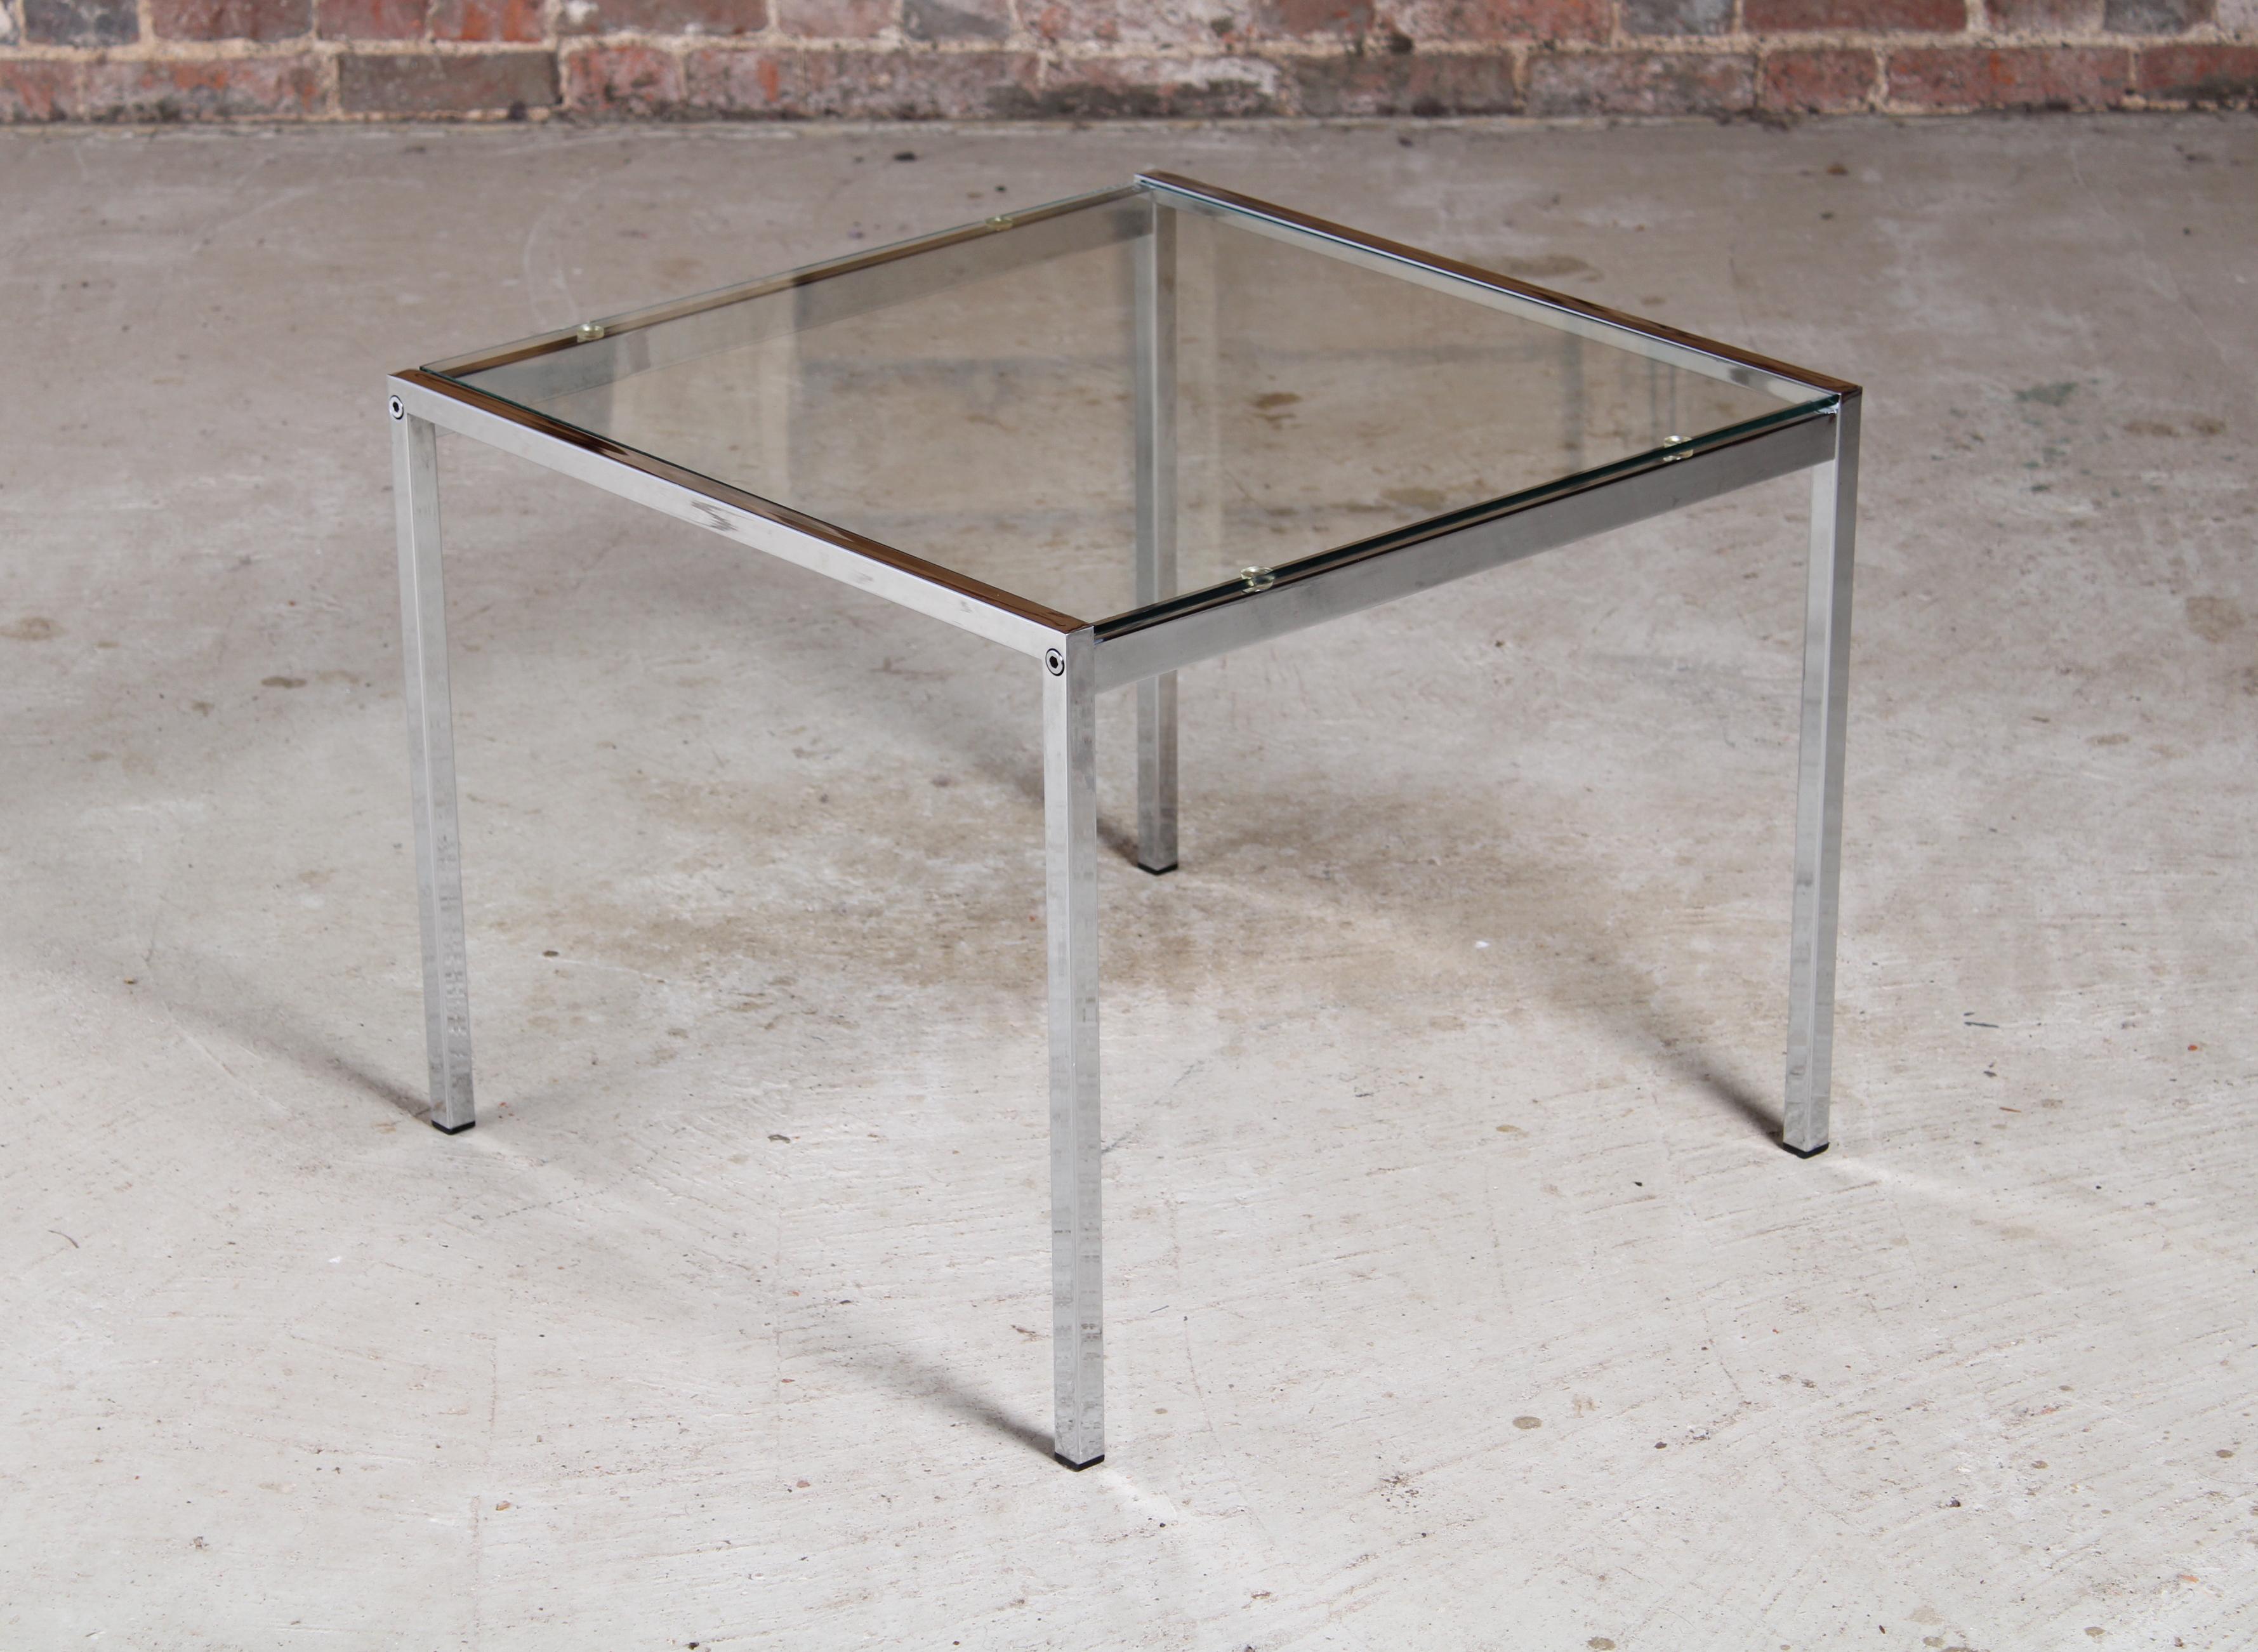 Mid Century chrome and glass square coffee table, circa 1970s. Excellent original condition.

Dimensions: 60 W x 60 D x 48 H cm

We offer international shipping, please contact us for a quote.